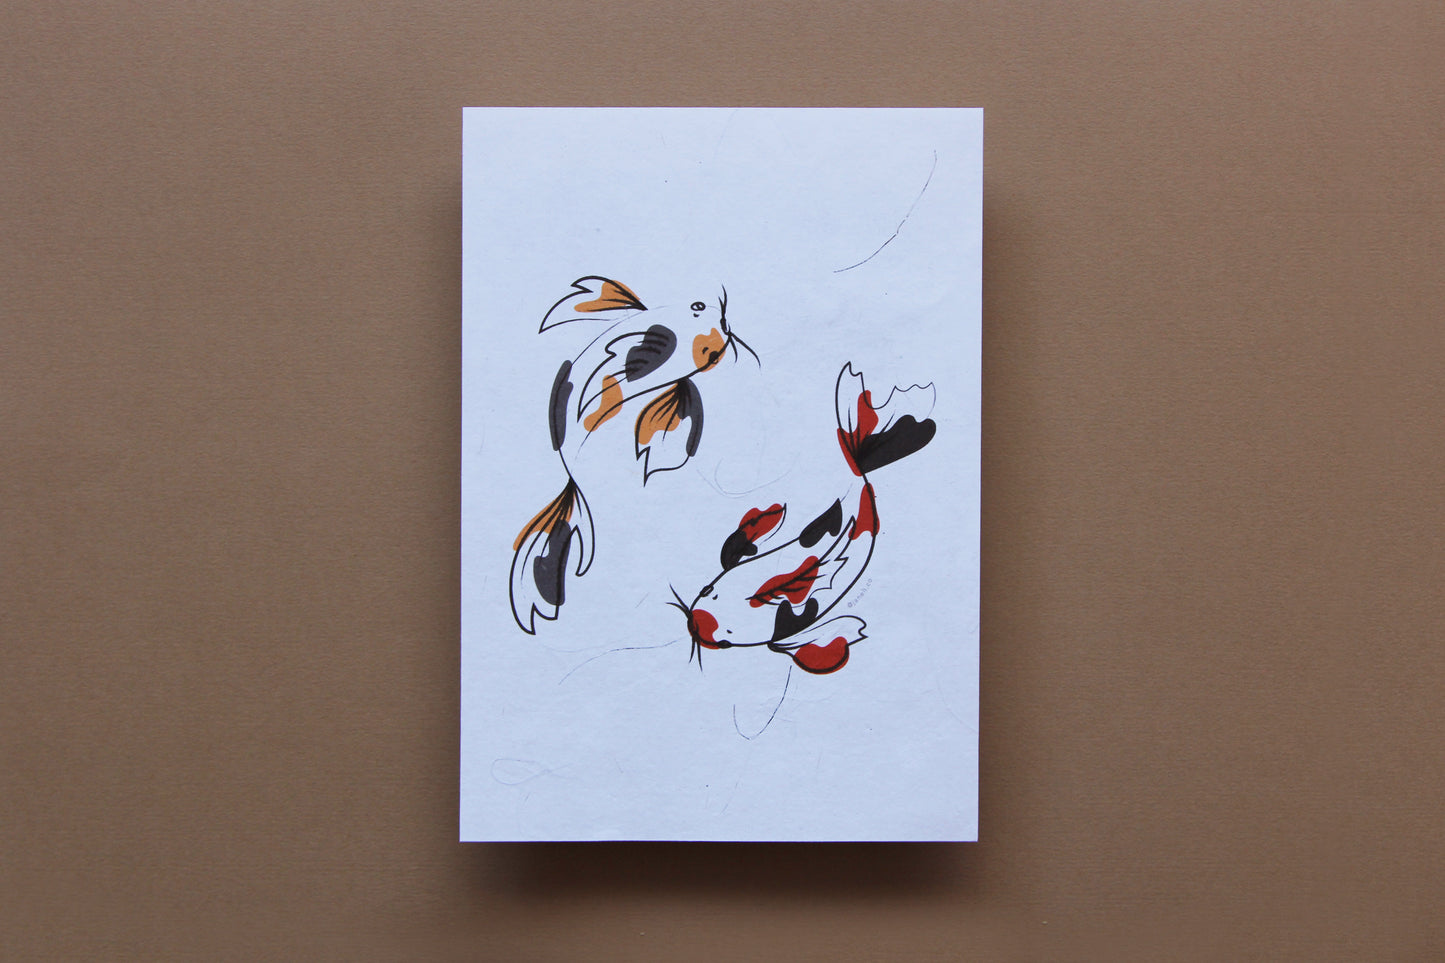 A JaneLi.Co print of 2 circling koi over a tan background.